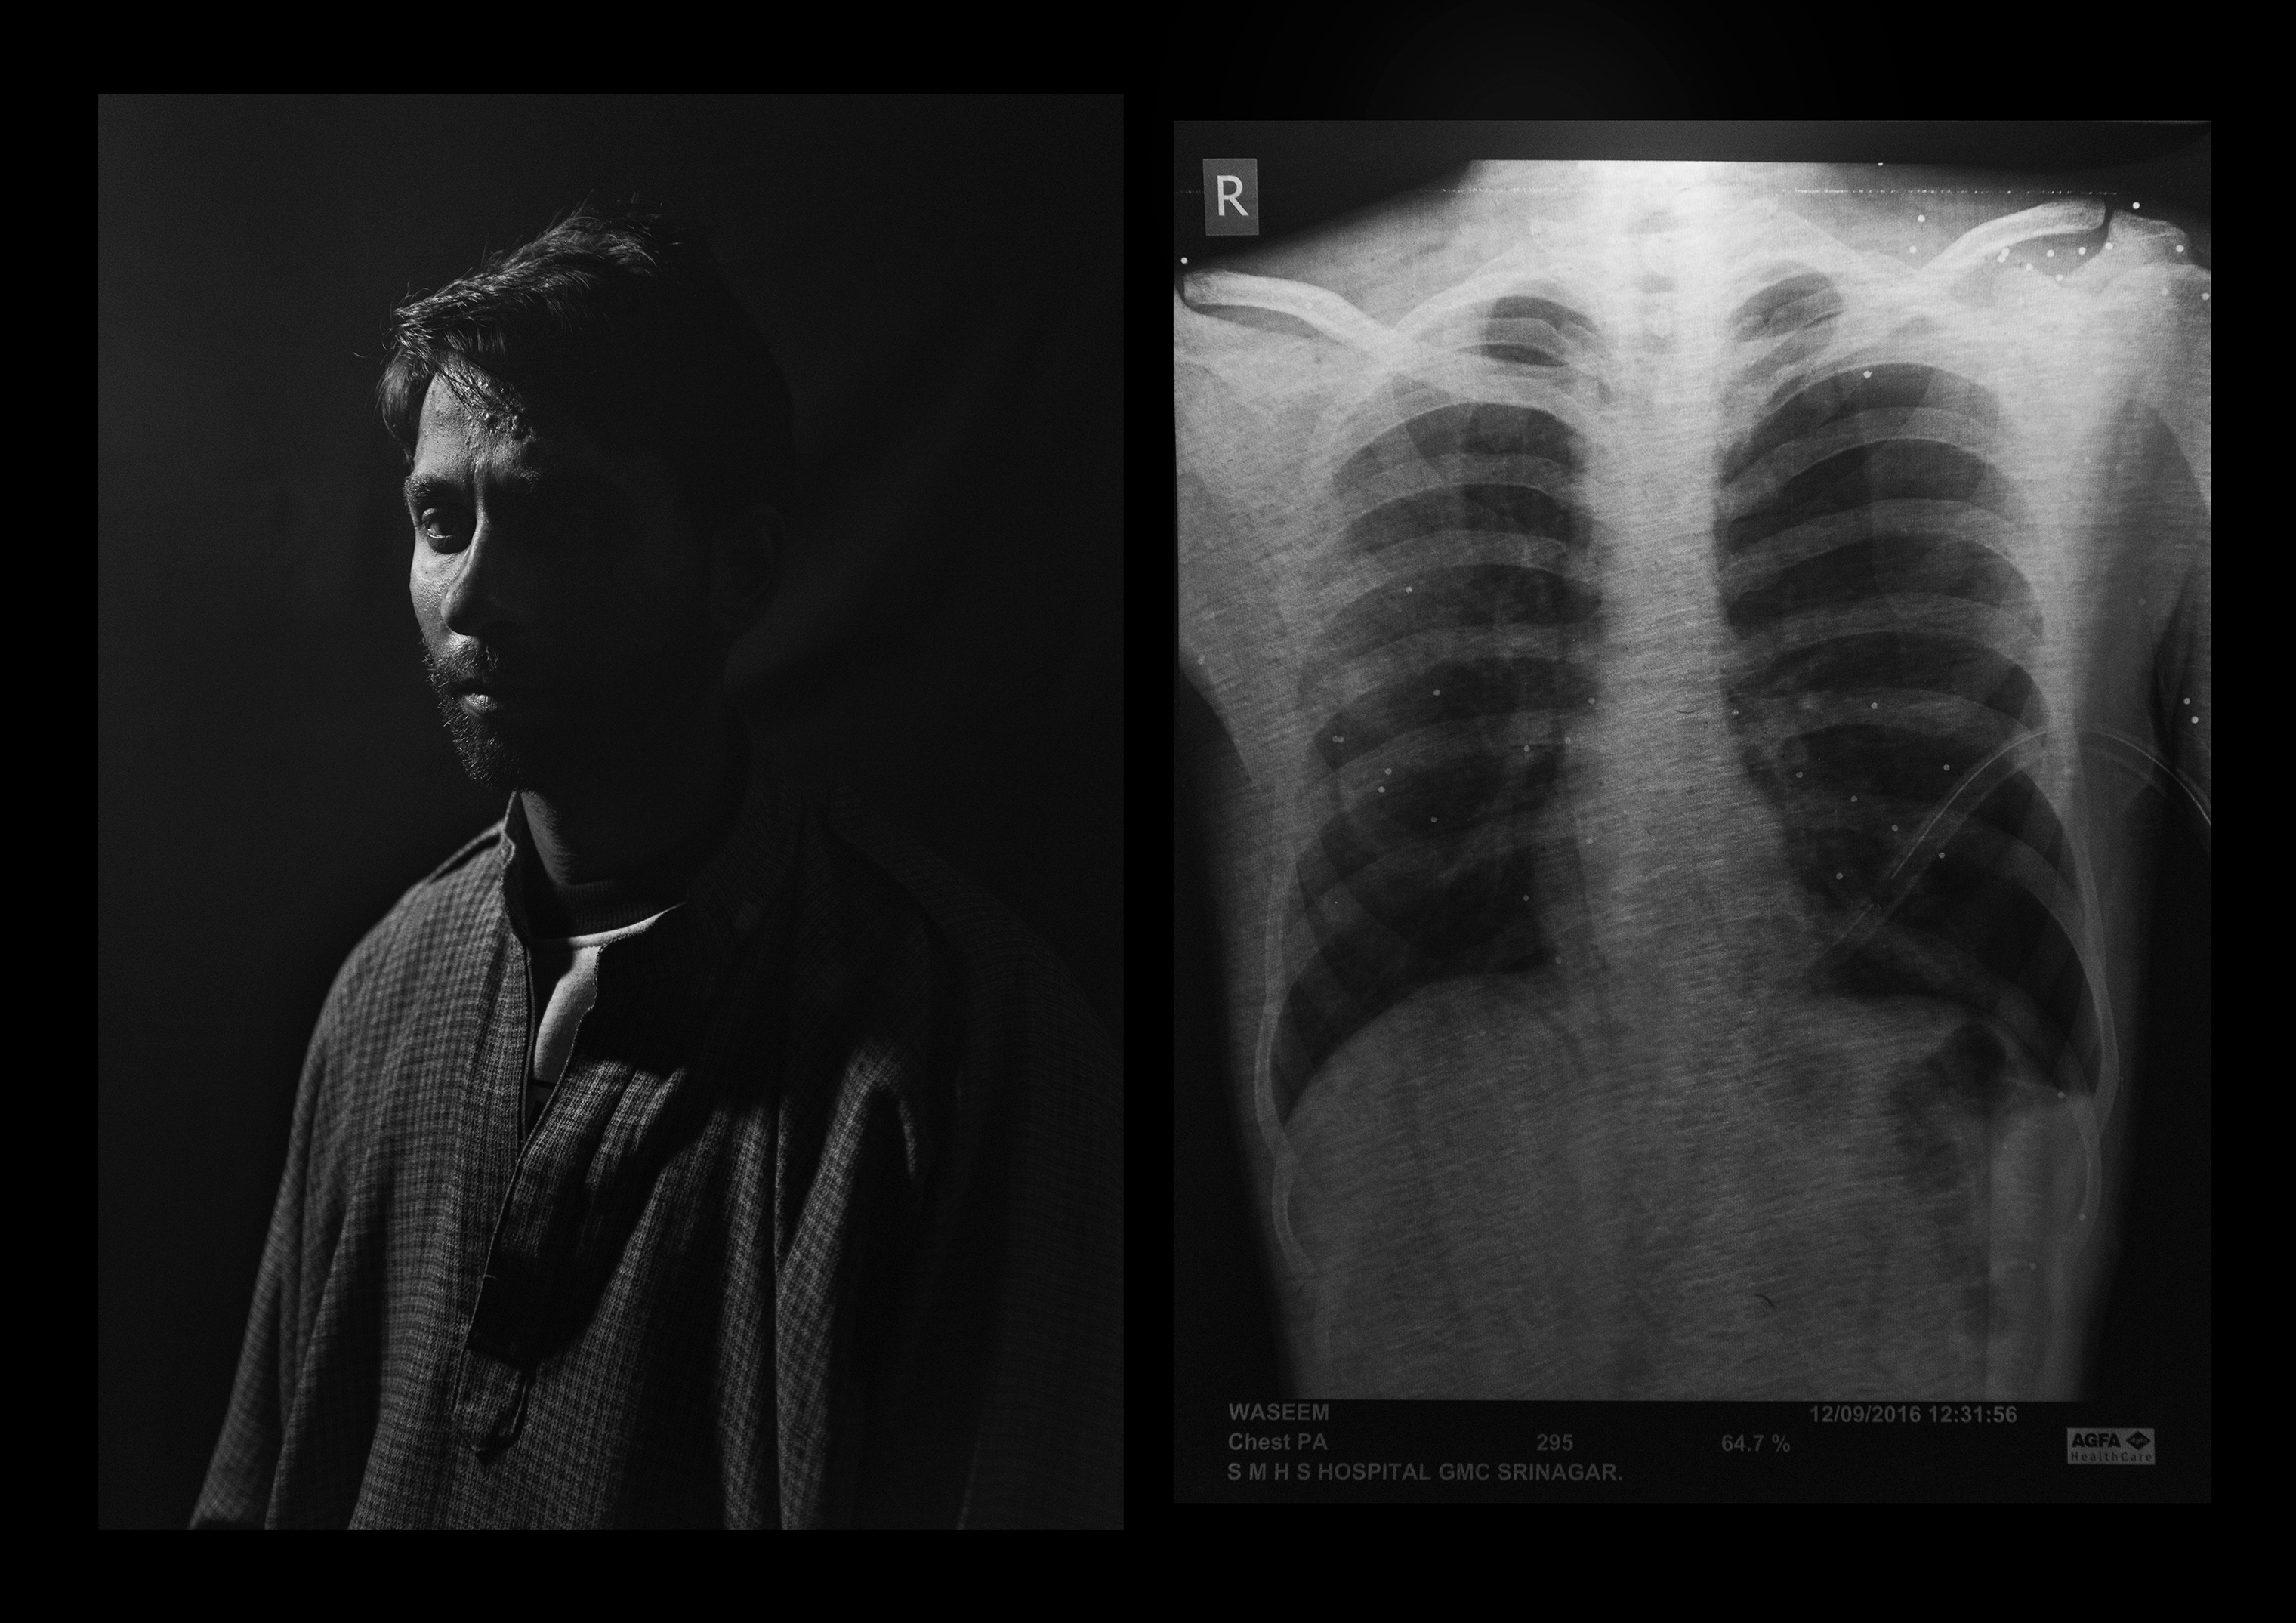 Shabkal Nazir Waseem, 25 years old, from Bijbehera. Police left him with one hundred pellets all over his upper body when they shot him on the Muslim holiday of Eid. Two lodged in each eye, leaving him almost totally blind. Four people were blinded by pellet guns in Kashmir on the day he was shot, he told Pasquarelli. (Camillo Pasquarelli)